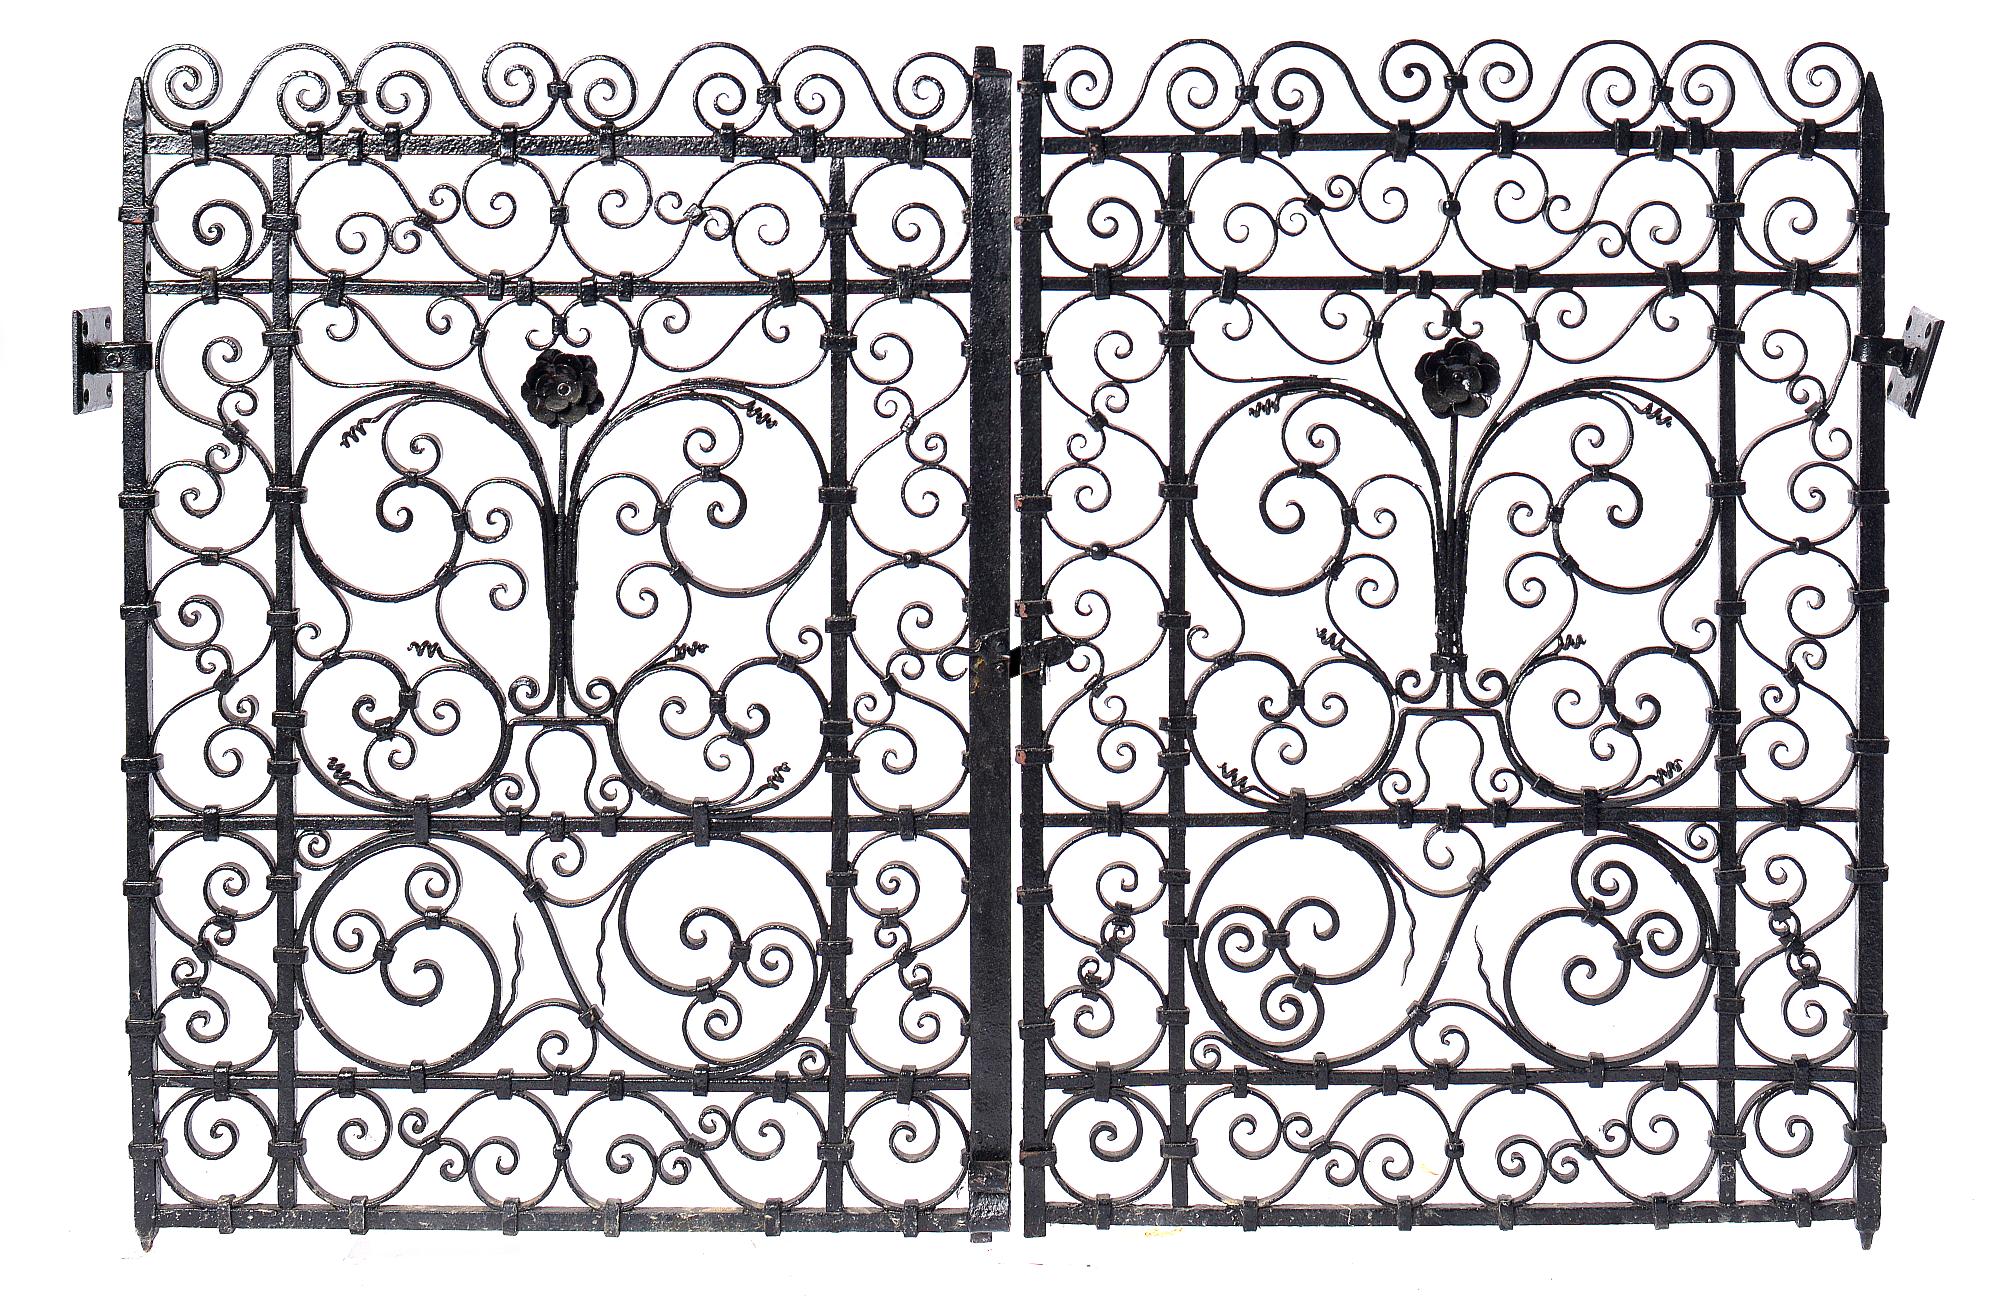 Architectural: A pair of small wrought iron gateslate 19th century90cm high by 128cm wide